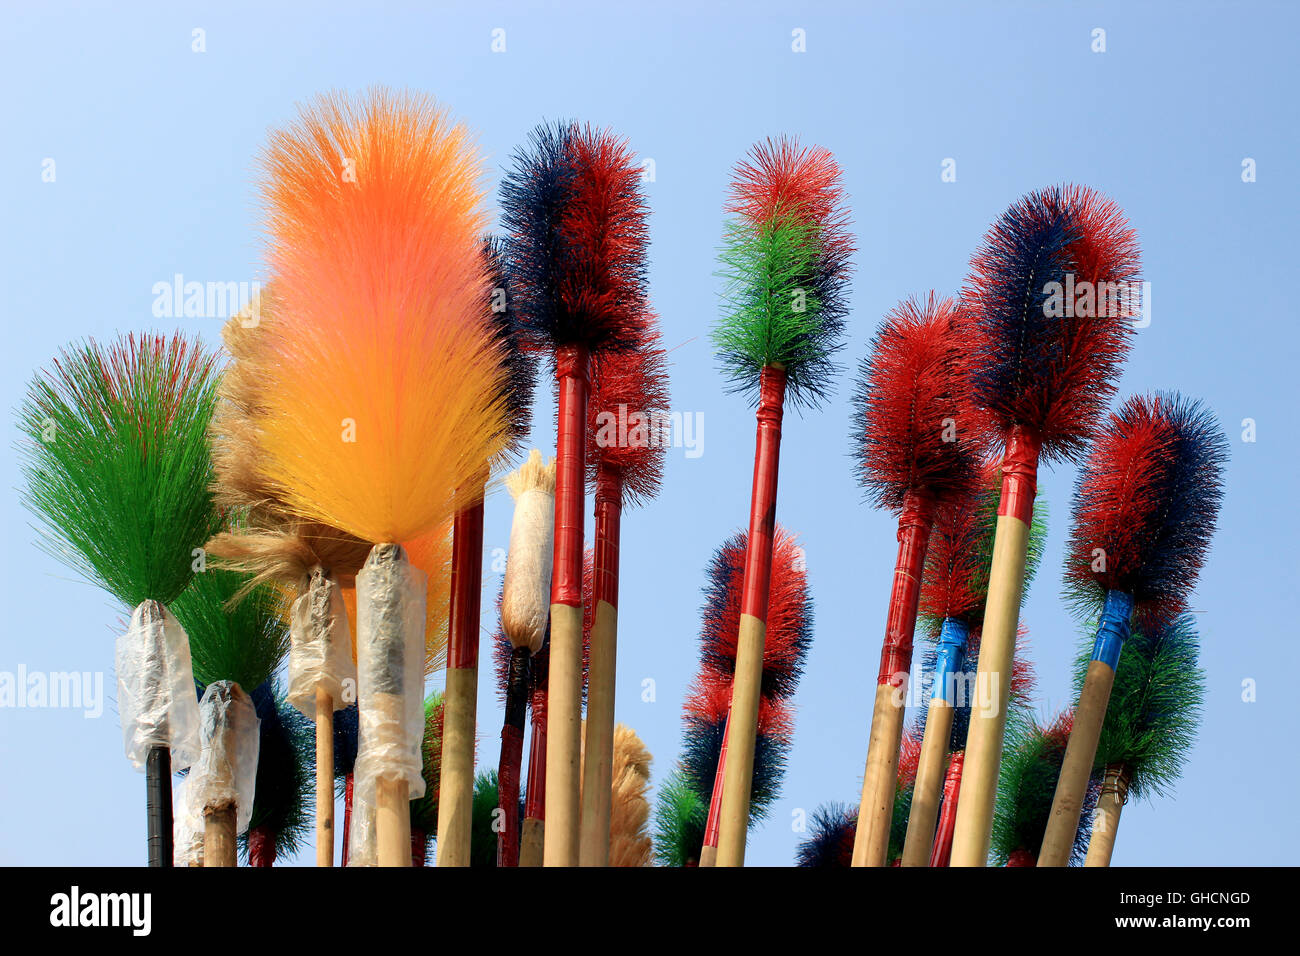 Plastic broom. These are plastic broom on sky background for cleaning the home. Stock Photo